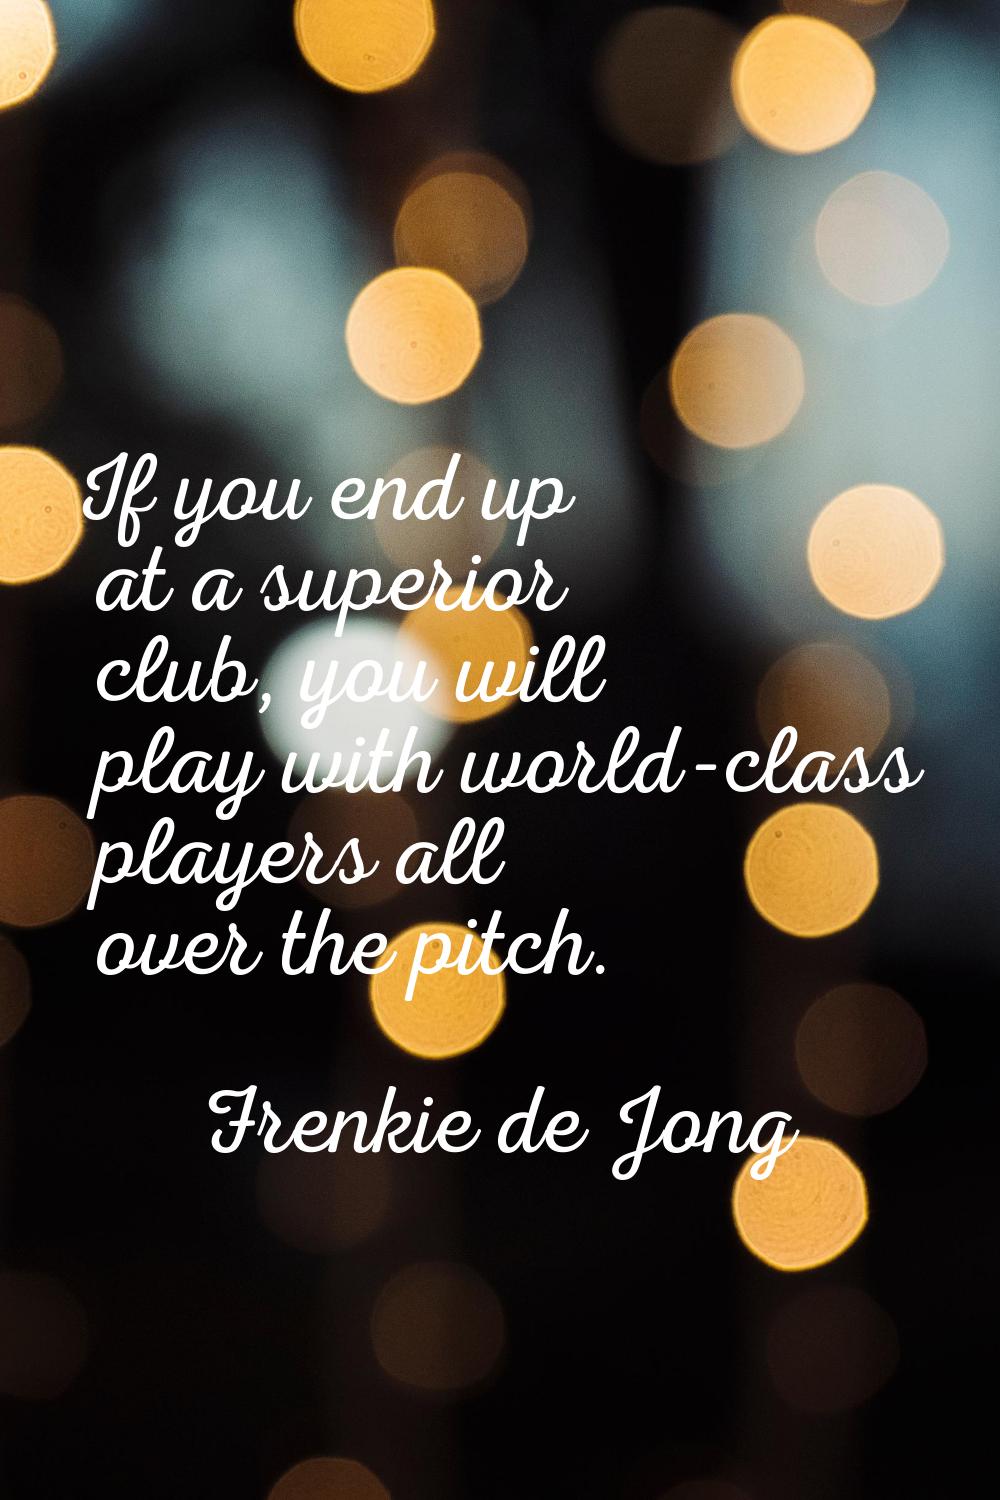 If you end up at a superior club, you will play with world-class players all over the pitch.